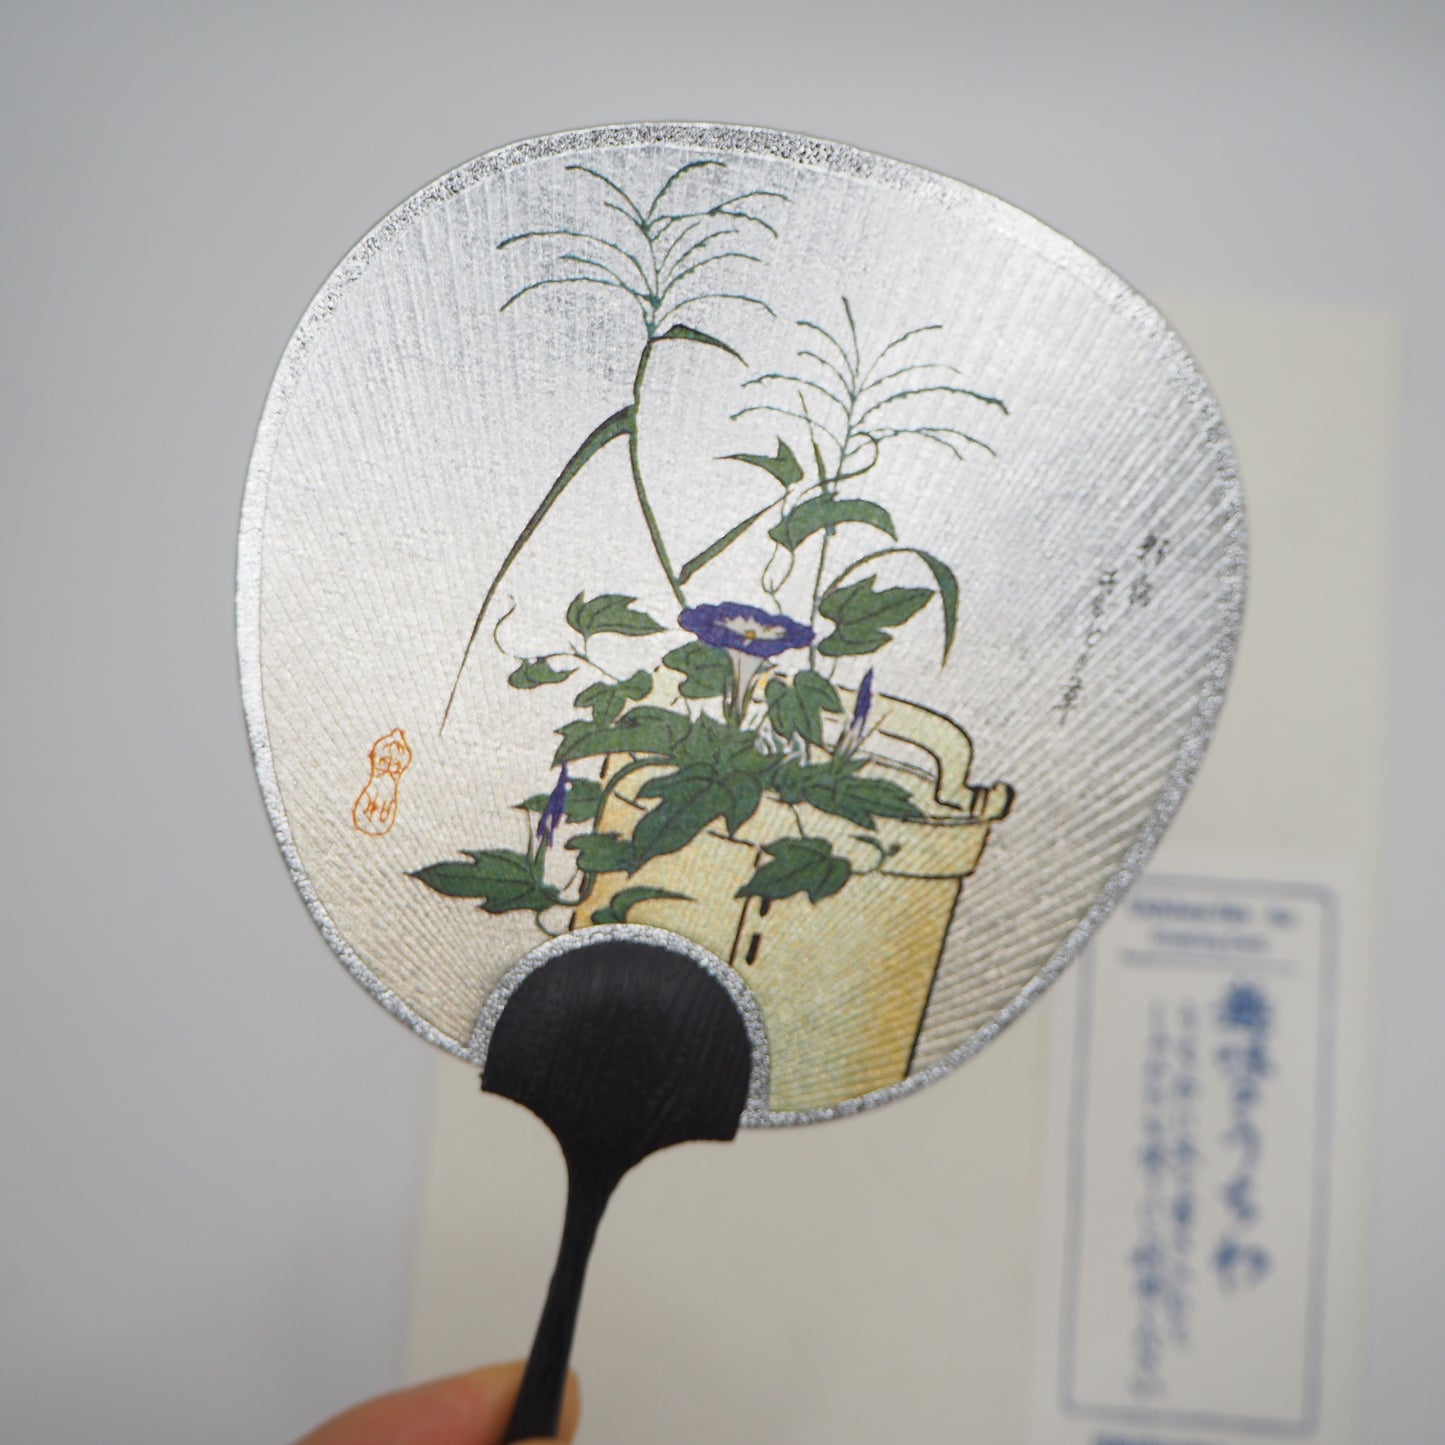 Small Uchiwa Fan Greeting Card -Flowers in vase